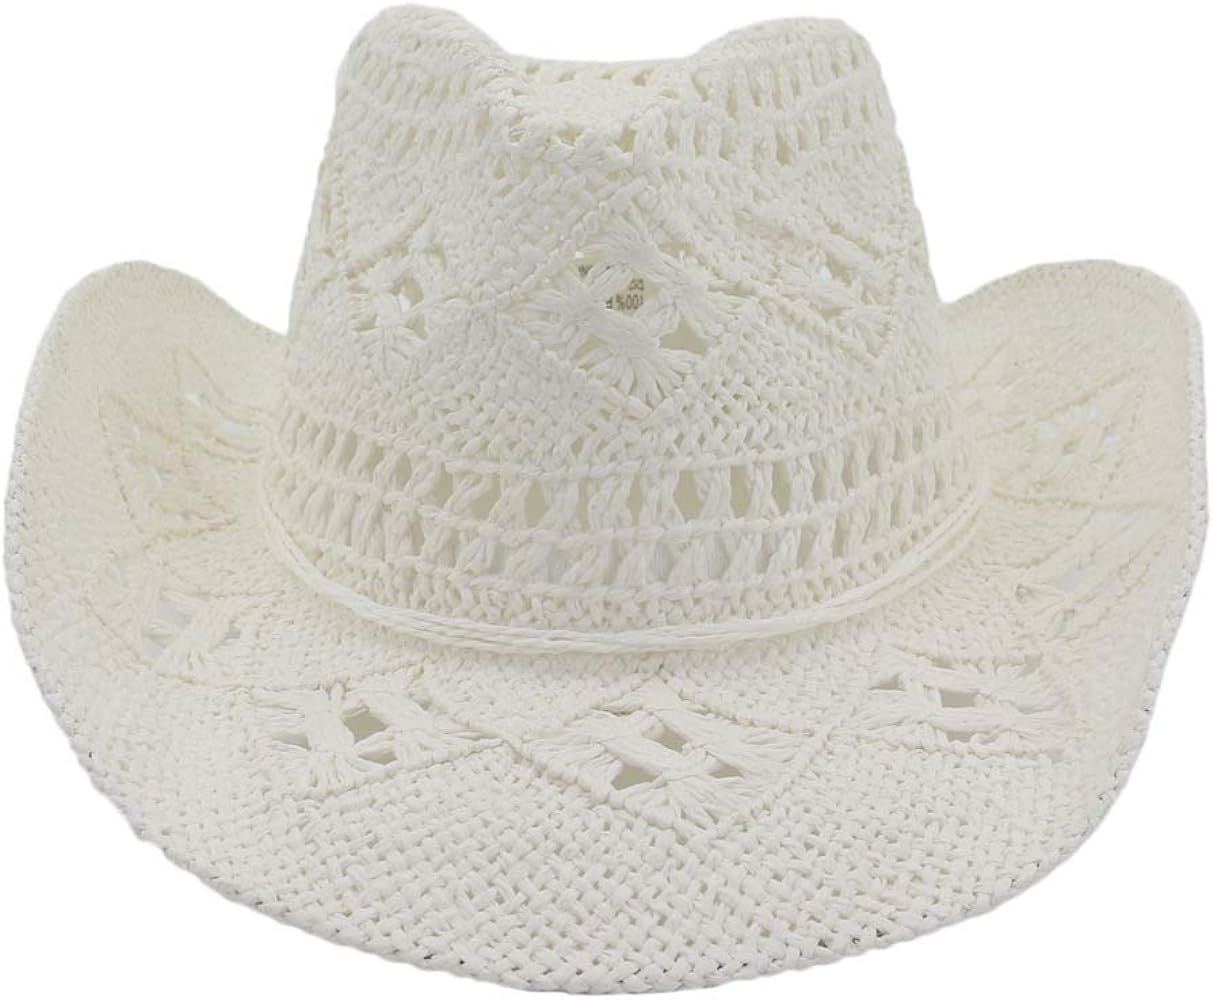 New Outdoor Couple Hat Travel Sunscreen hat Western Cowboy Straw Hat Hand Woven Straw Hat | Amazon (US)